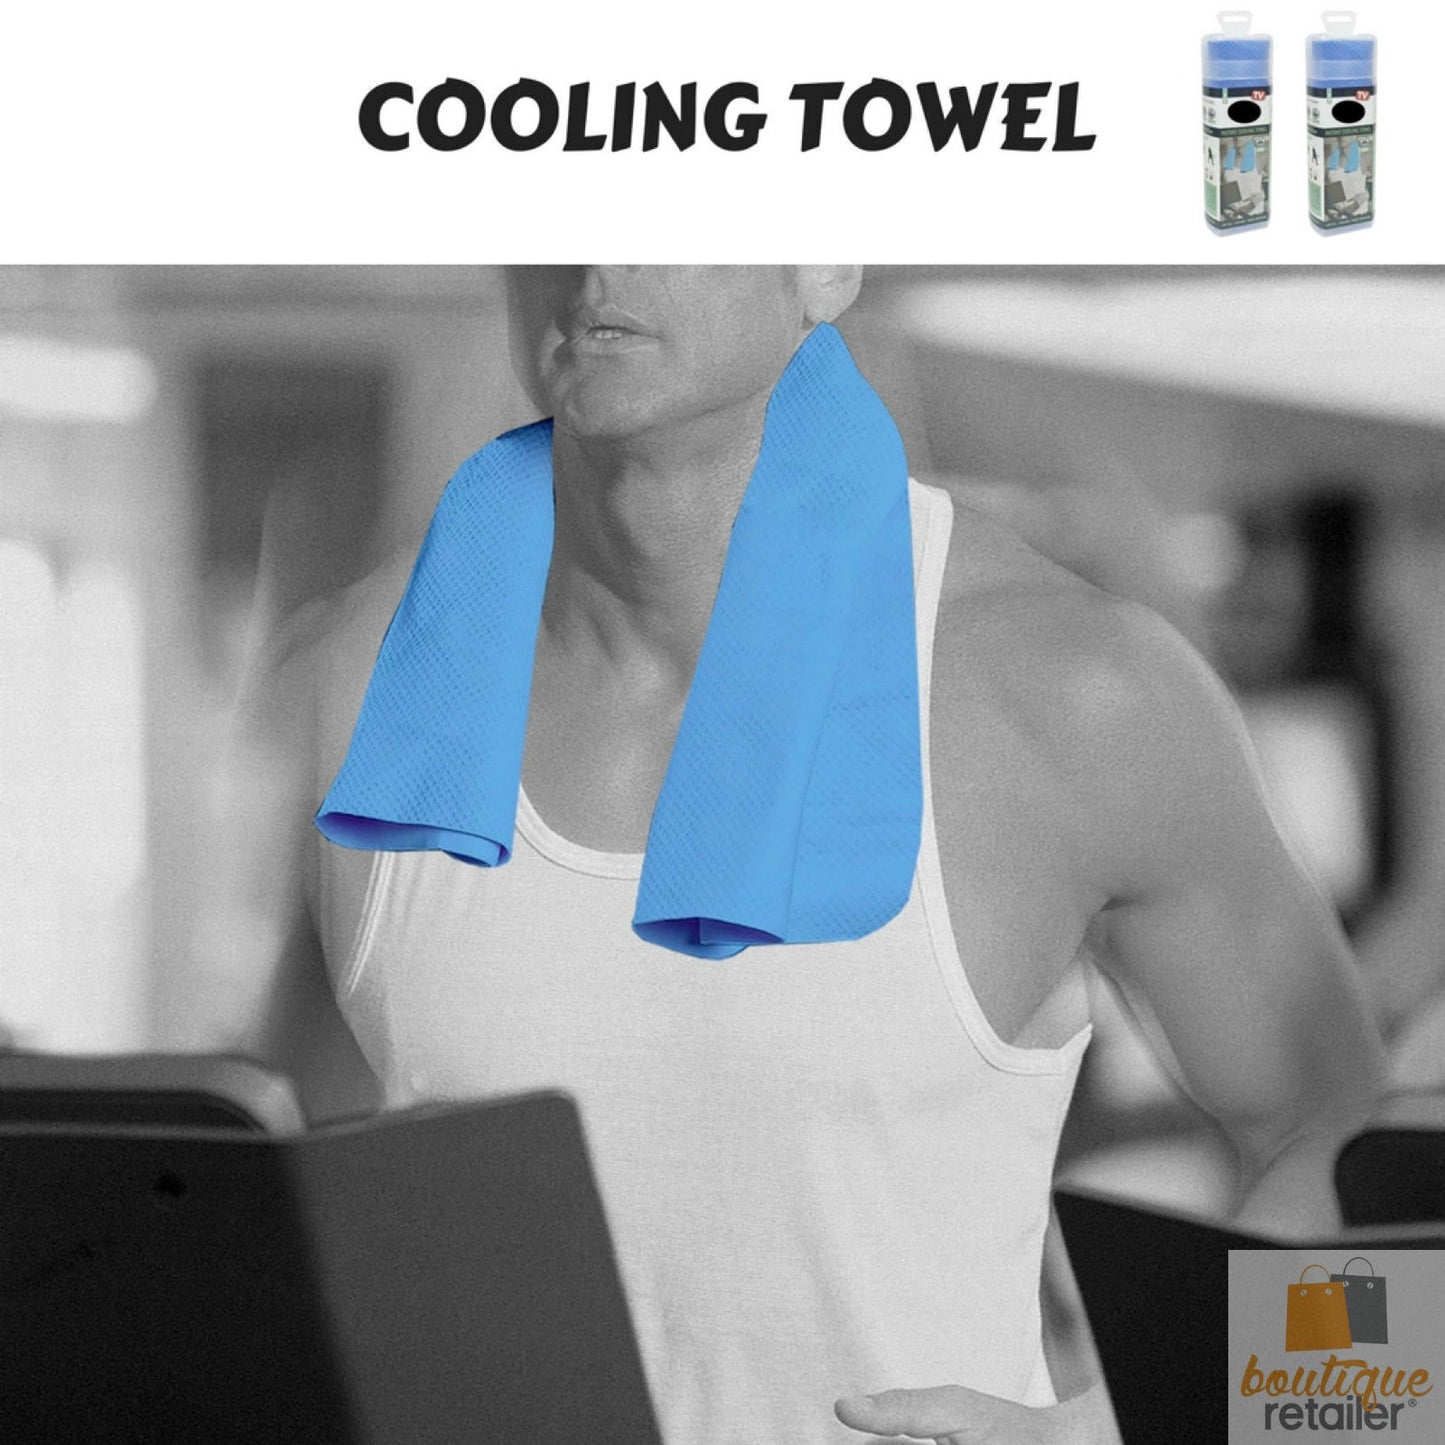 2x INSTANT COOLING TOWEL UPF 50+ Ice Cold Sport Sweat Absorbing Leisure 66x43